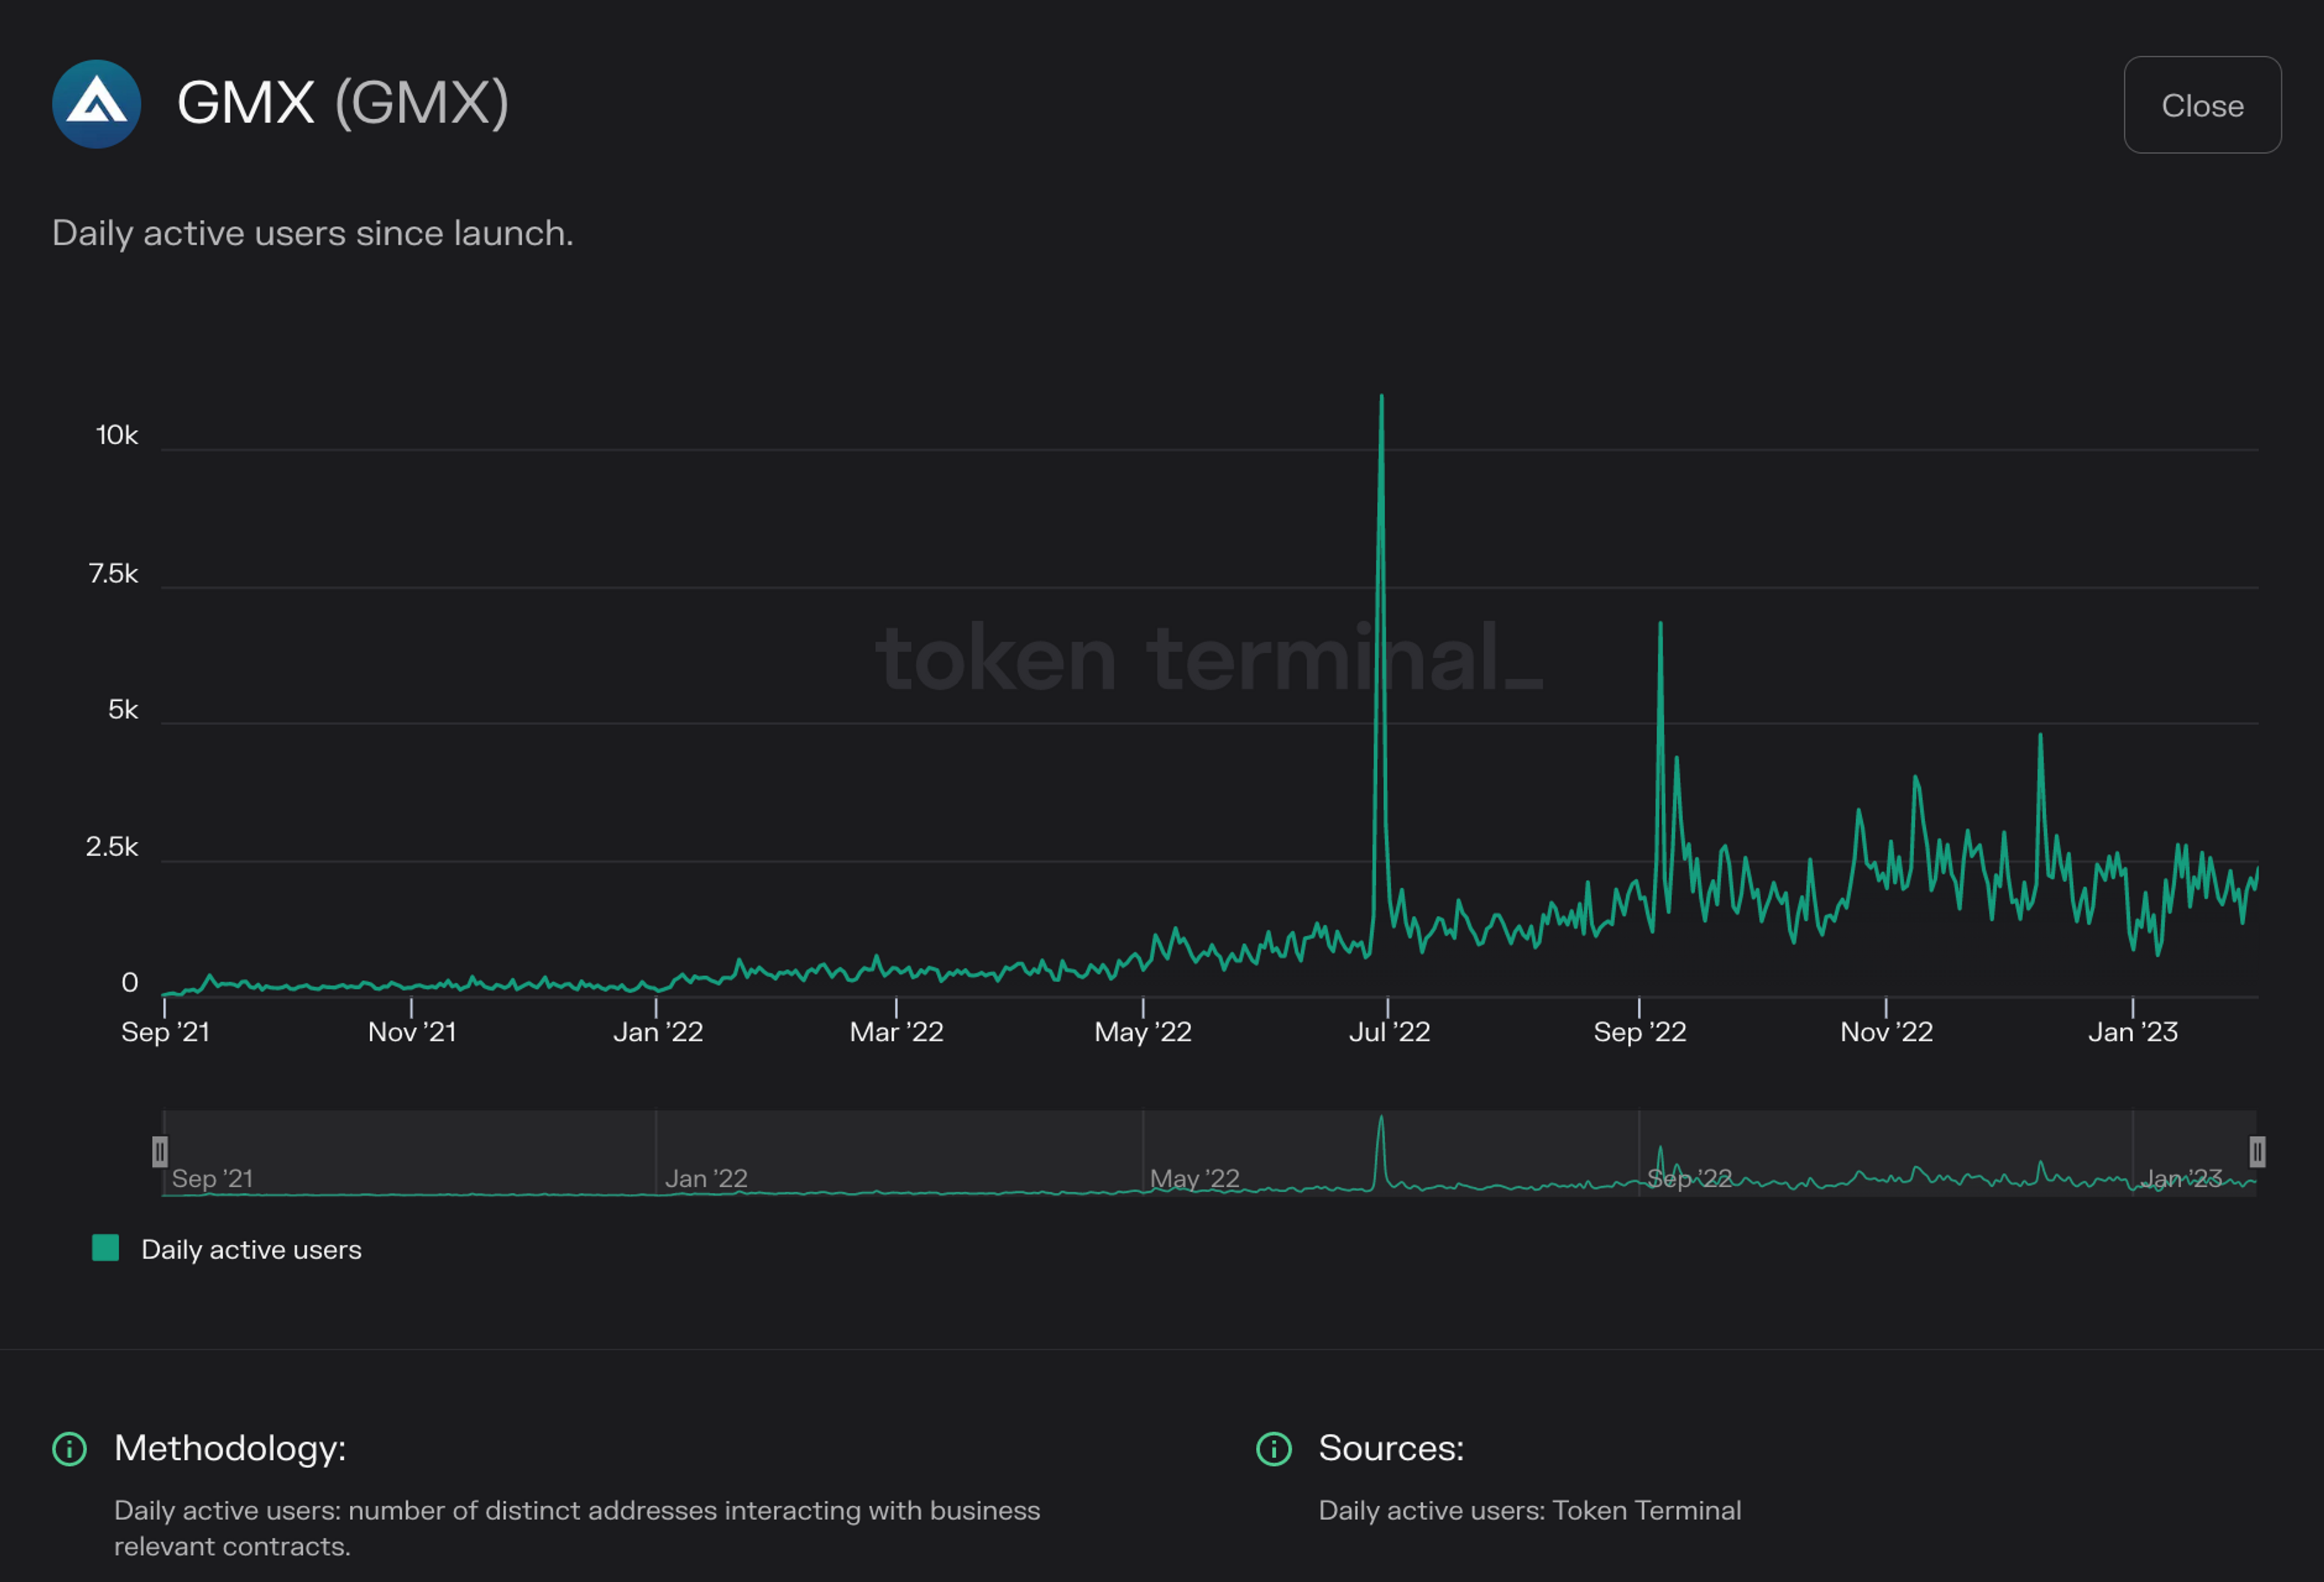 Chart of GMX daily active users